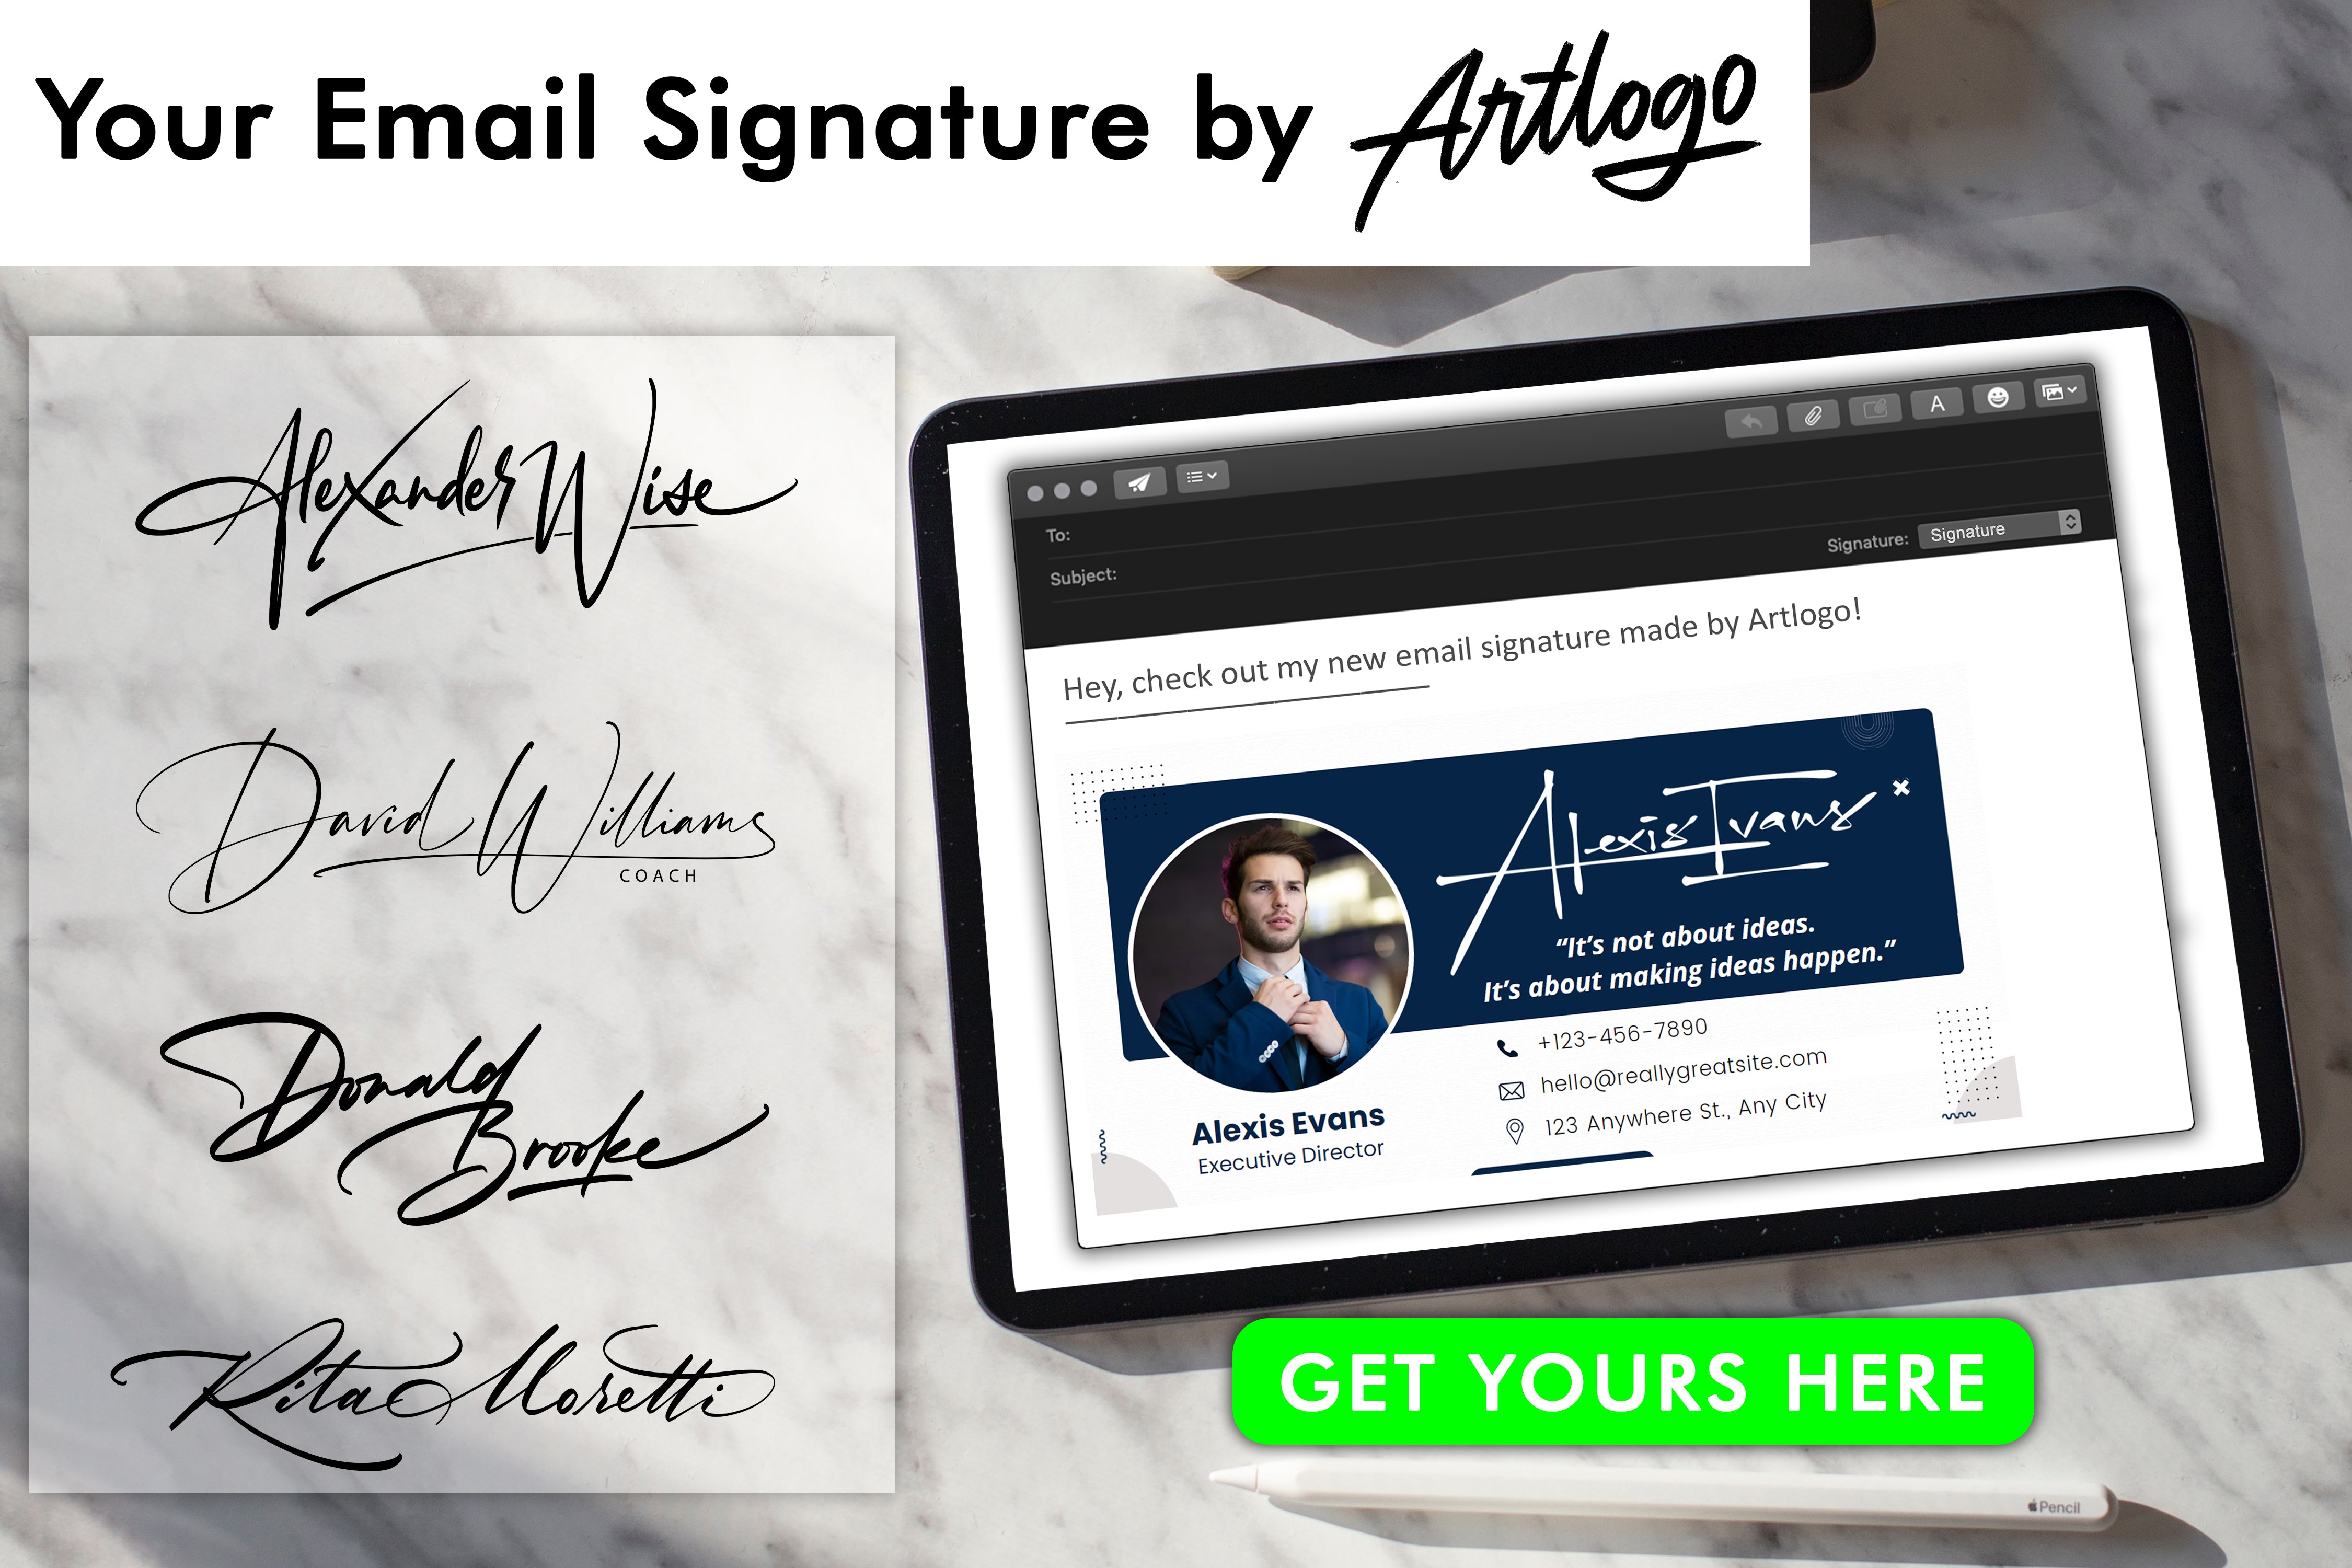 Elevate your email game with our guide to Email Sign Offs. From humor to professionalism, find the ideal sign-offs for any occasion. Read more here!